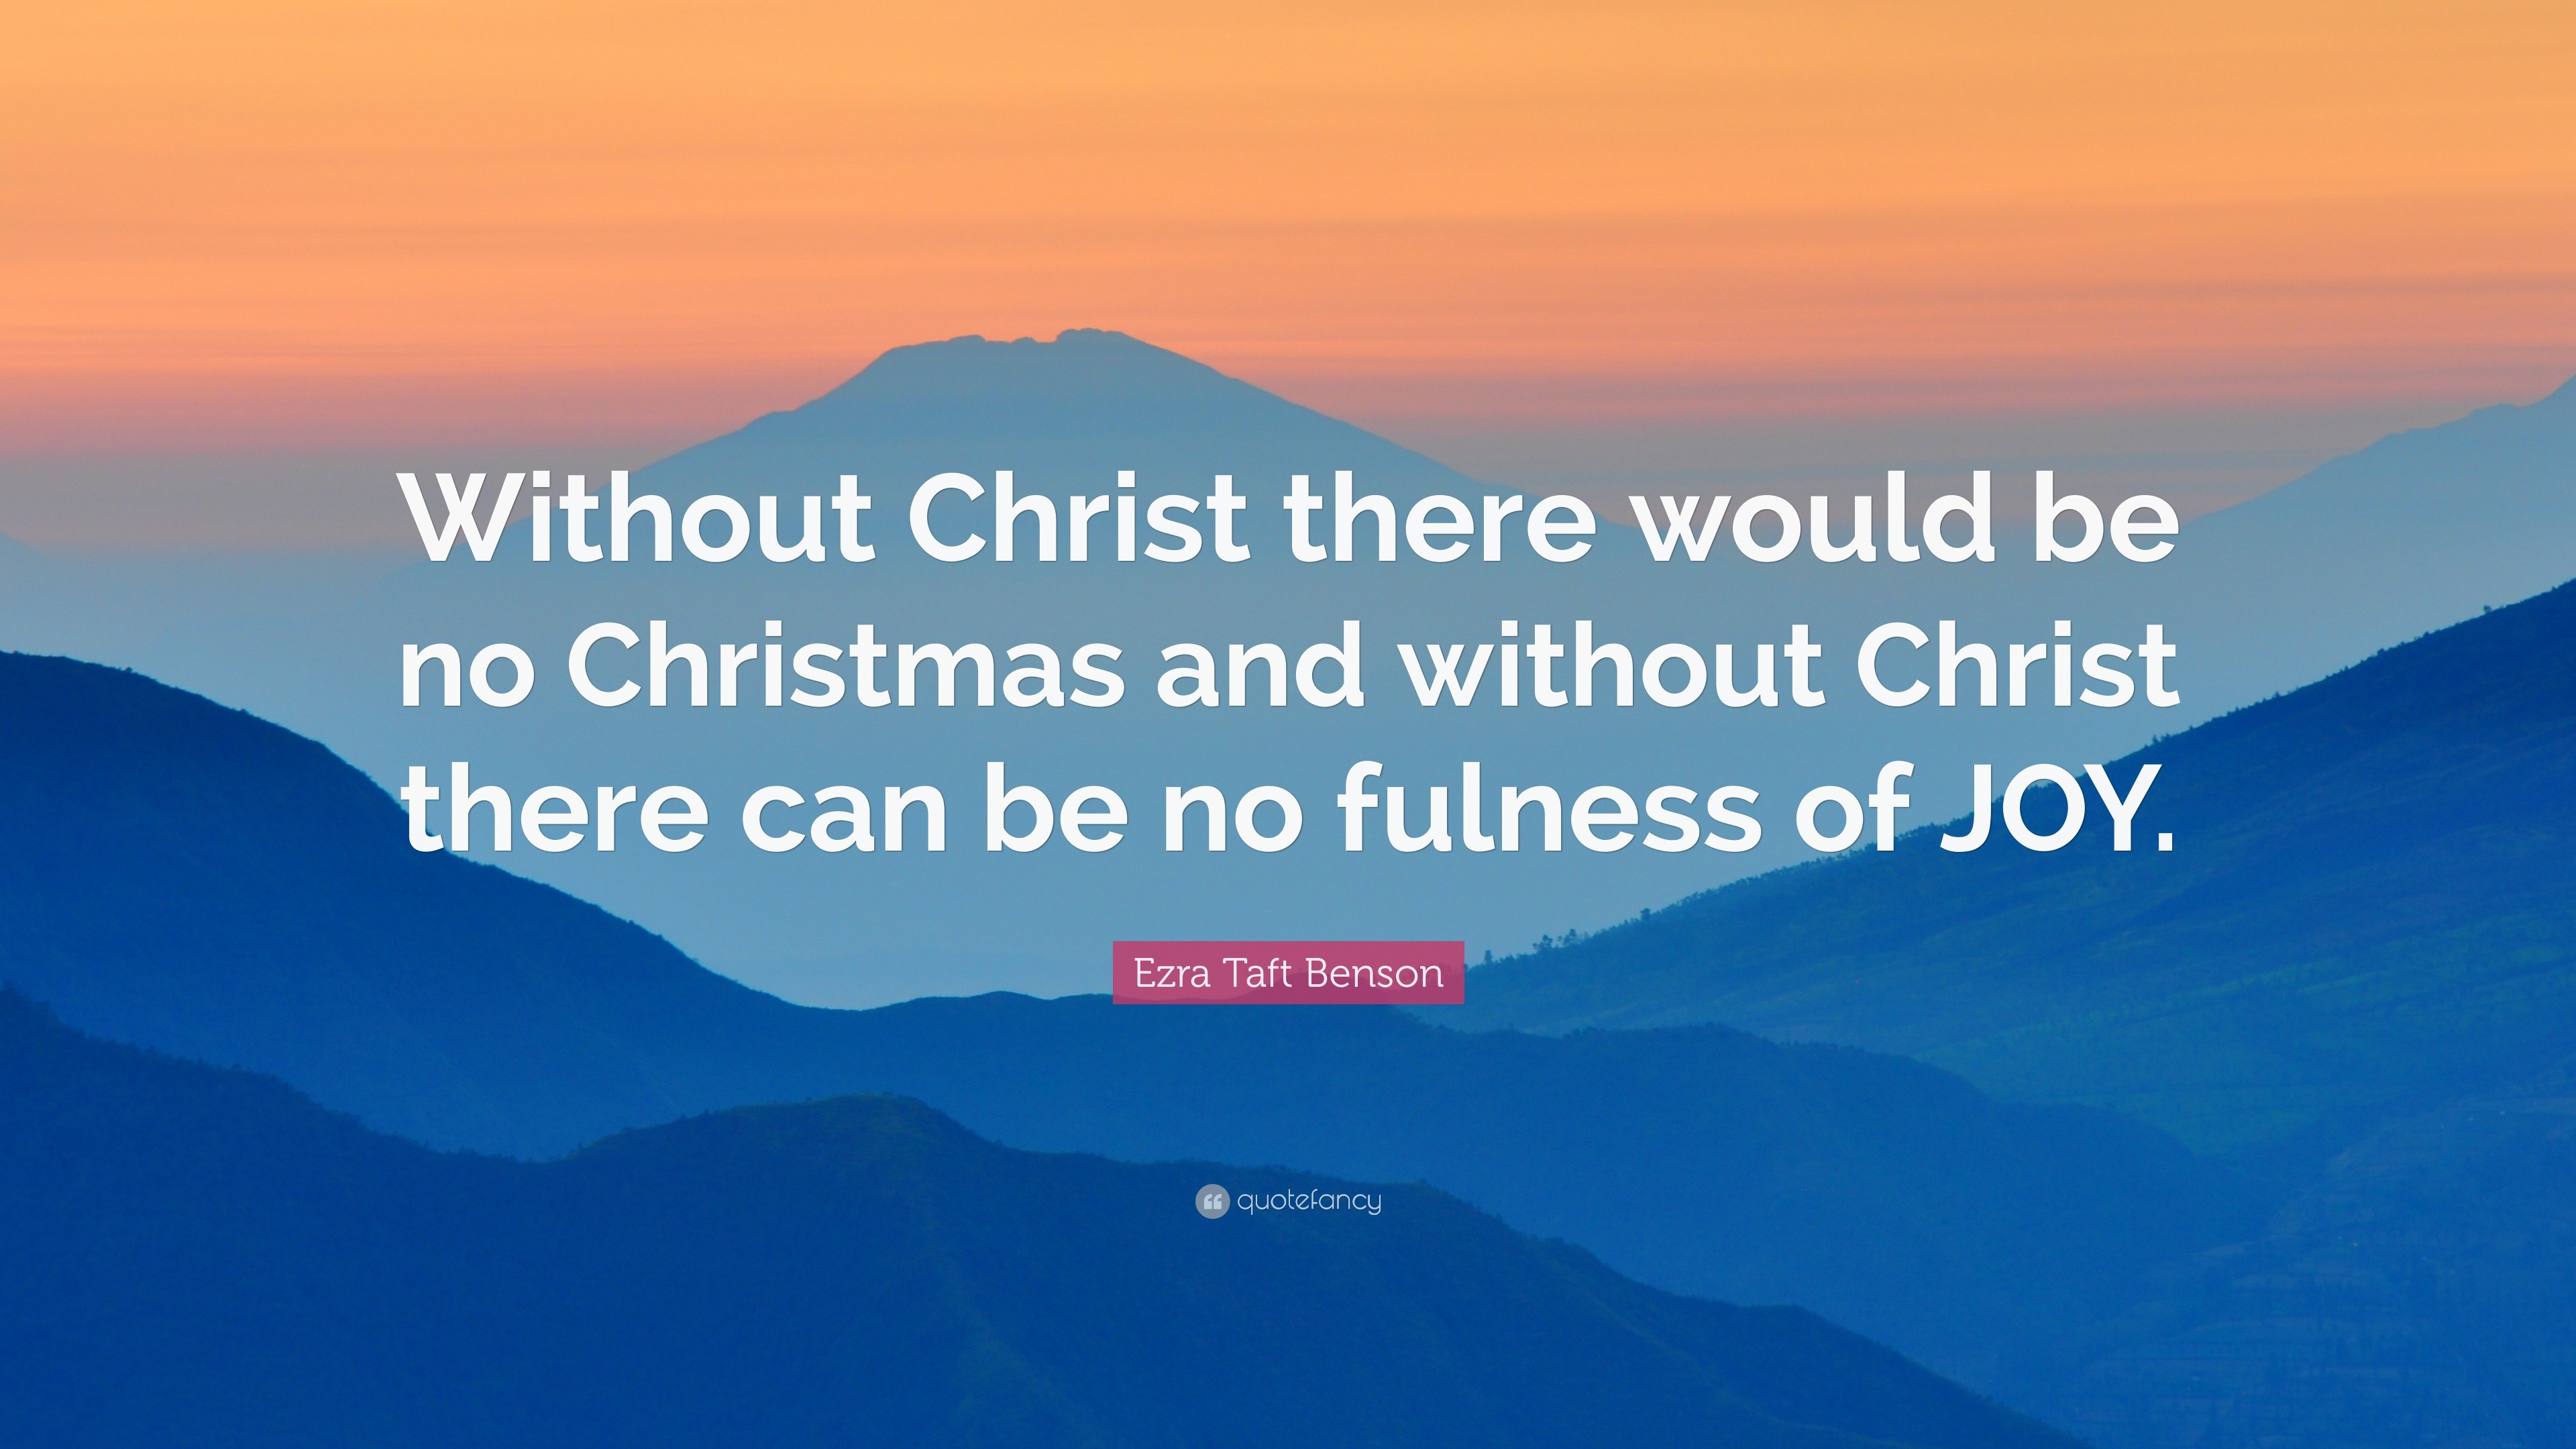 Ezra Taft Benson Quote: “Without Christ there would be no Christmas and ...